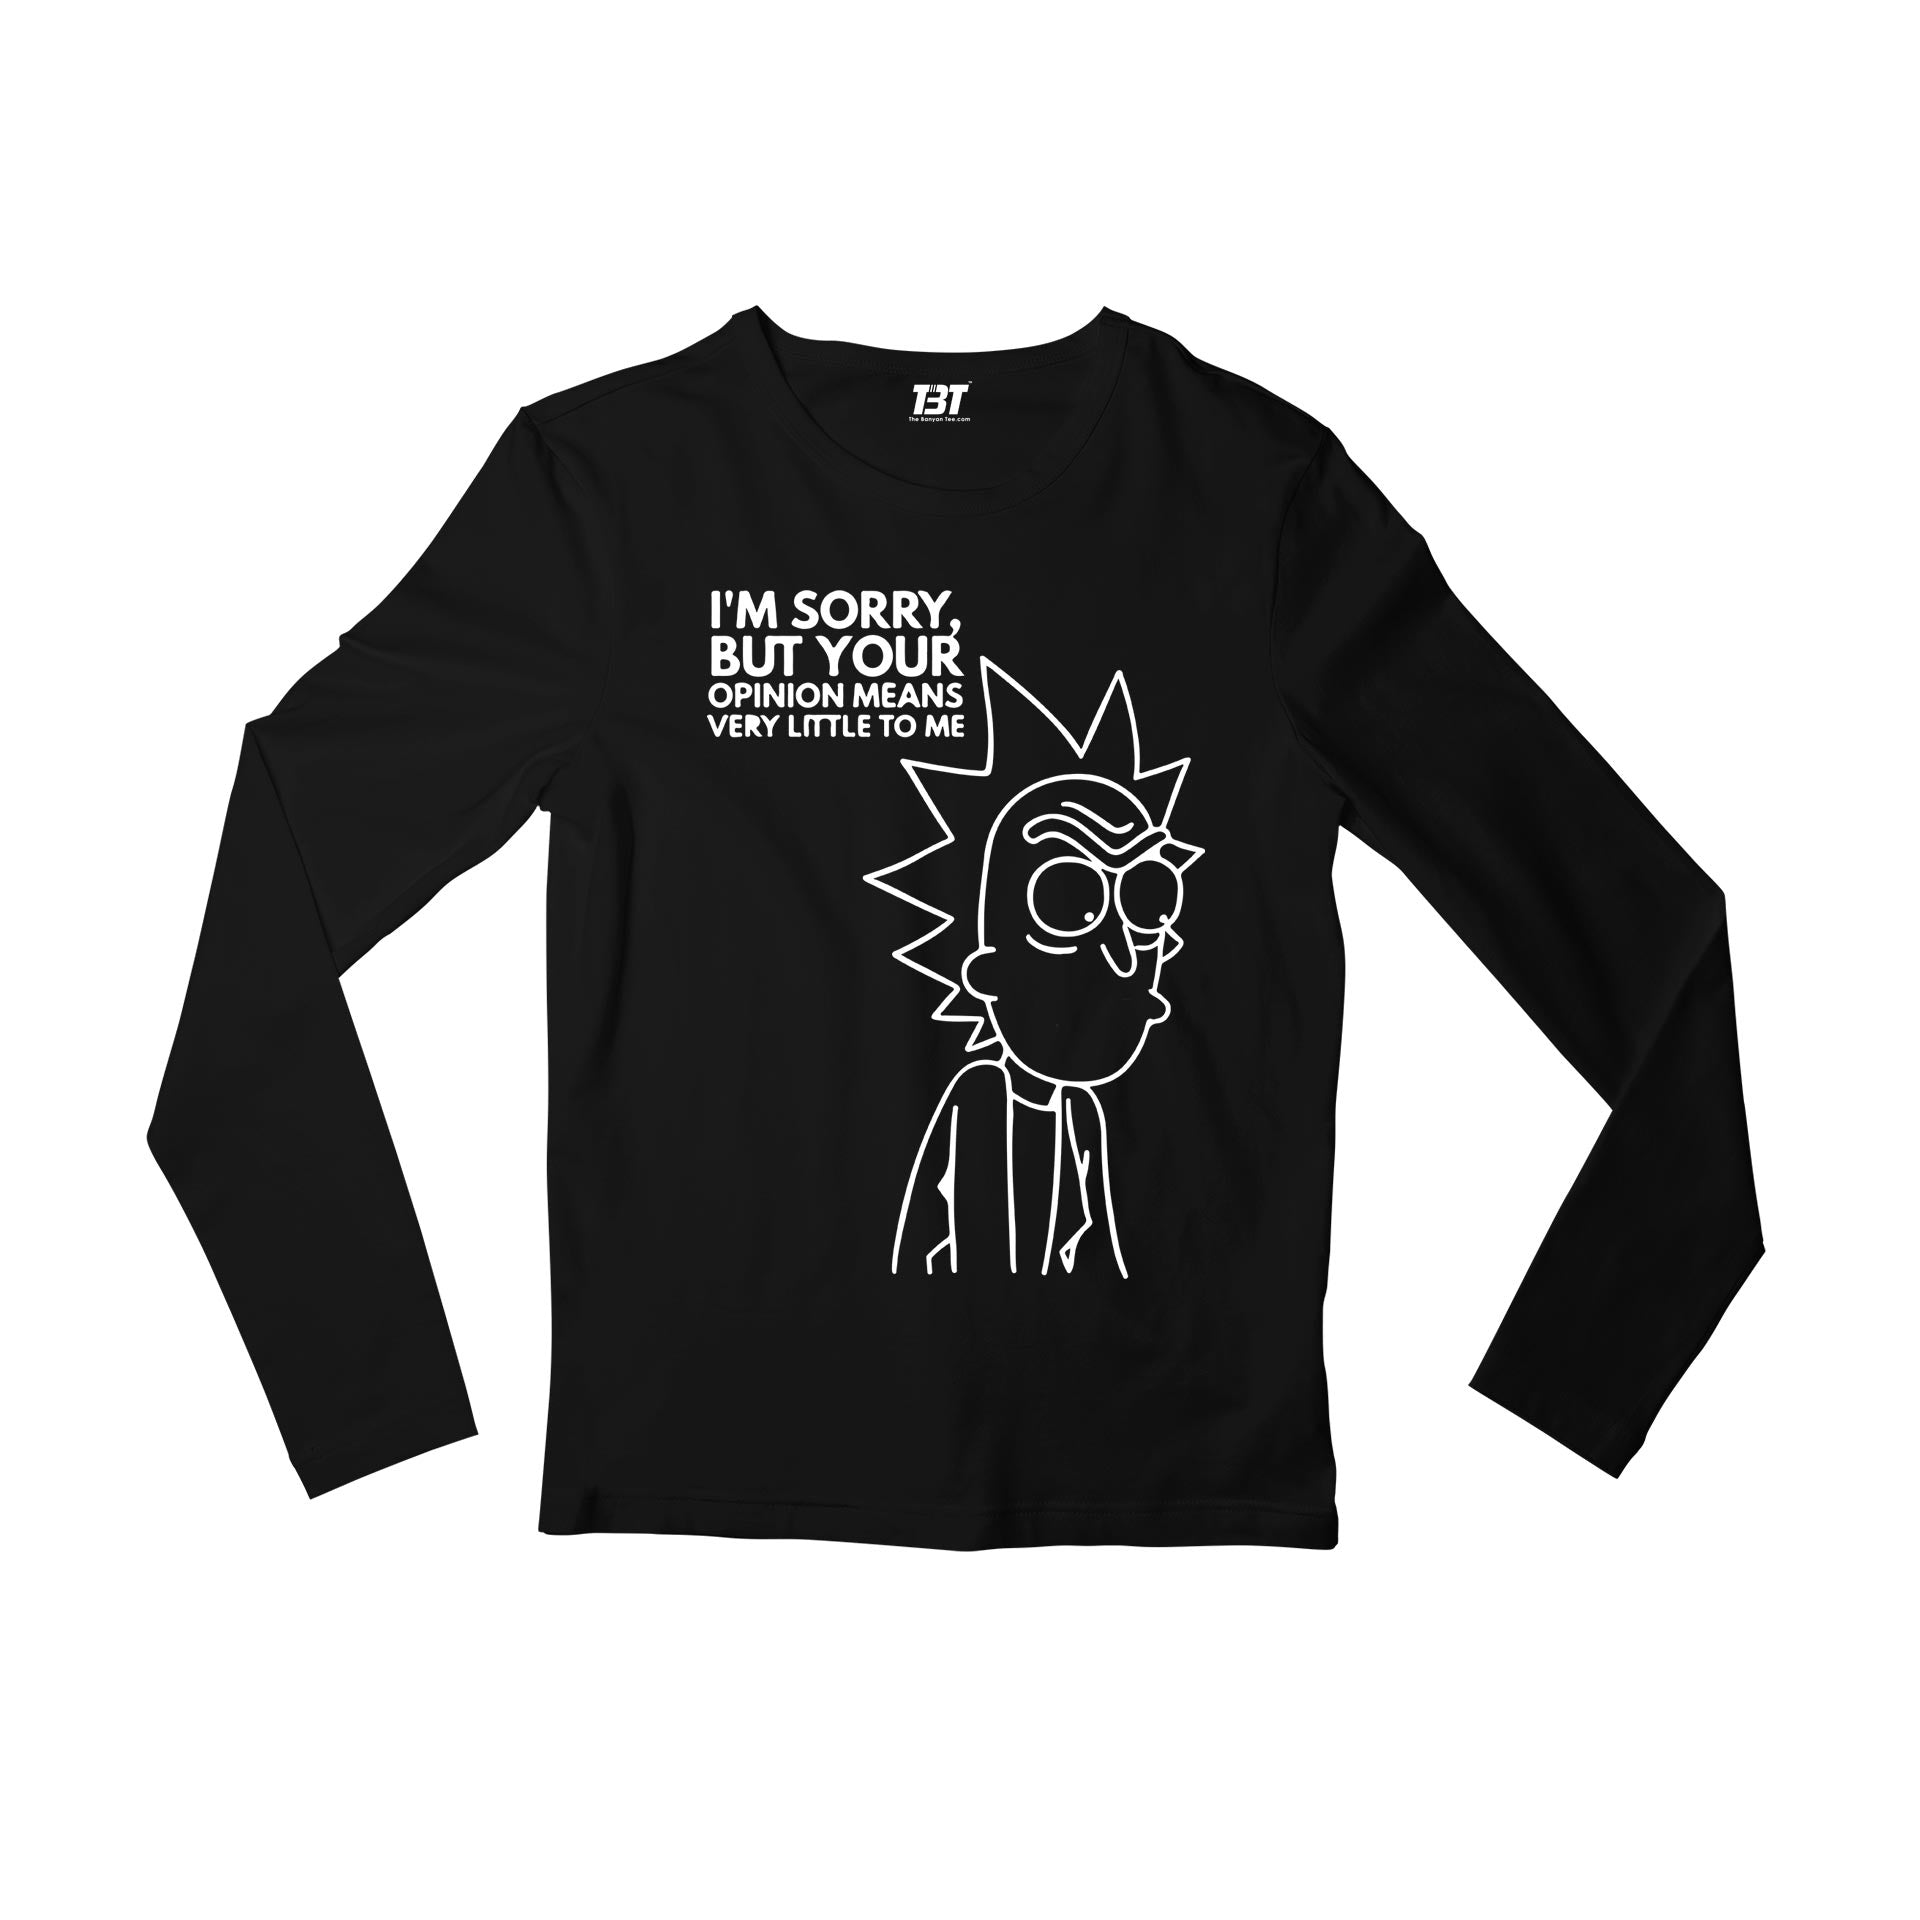 rick and morty opinion full sleeves long sleeves buy online india the banyan tee tbt men women girls boys unisex black rick and morty online summer beth mr meeseeks jerry quote vector art clothing accessories merchandise